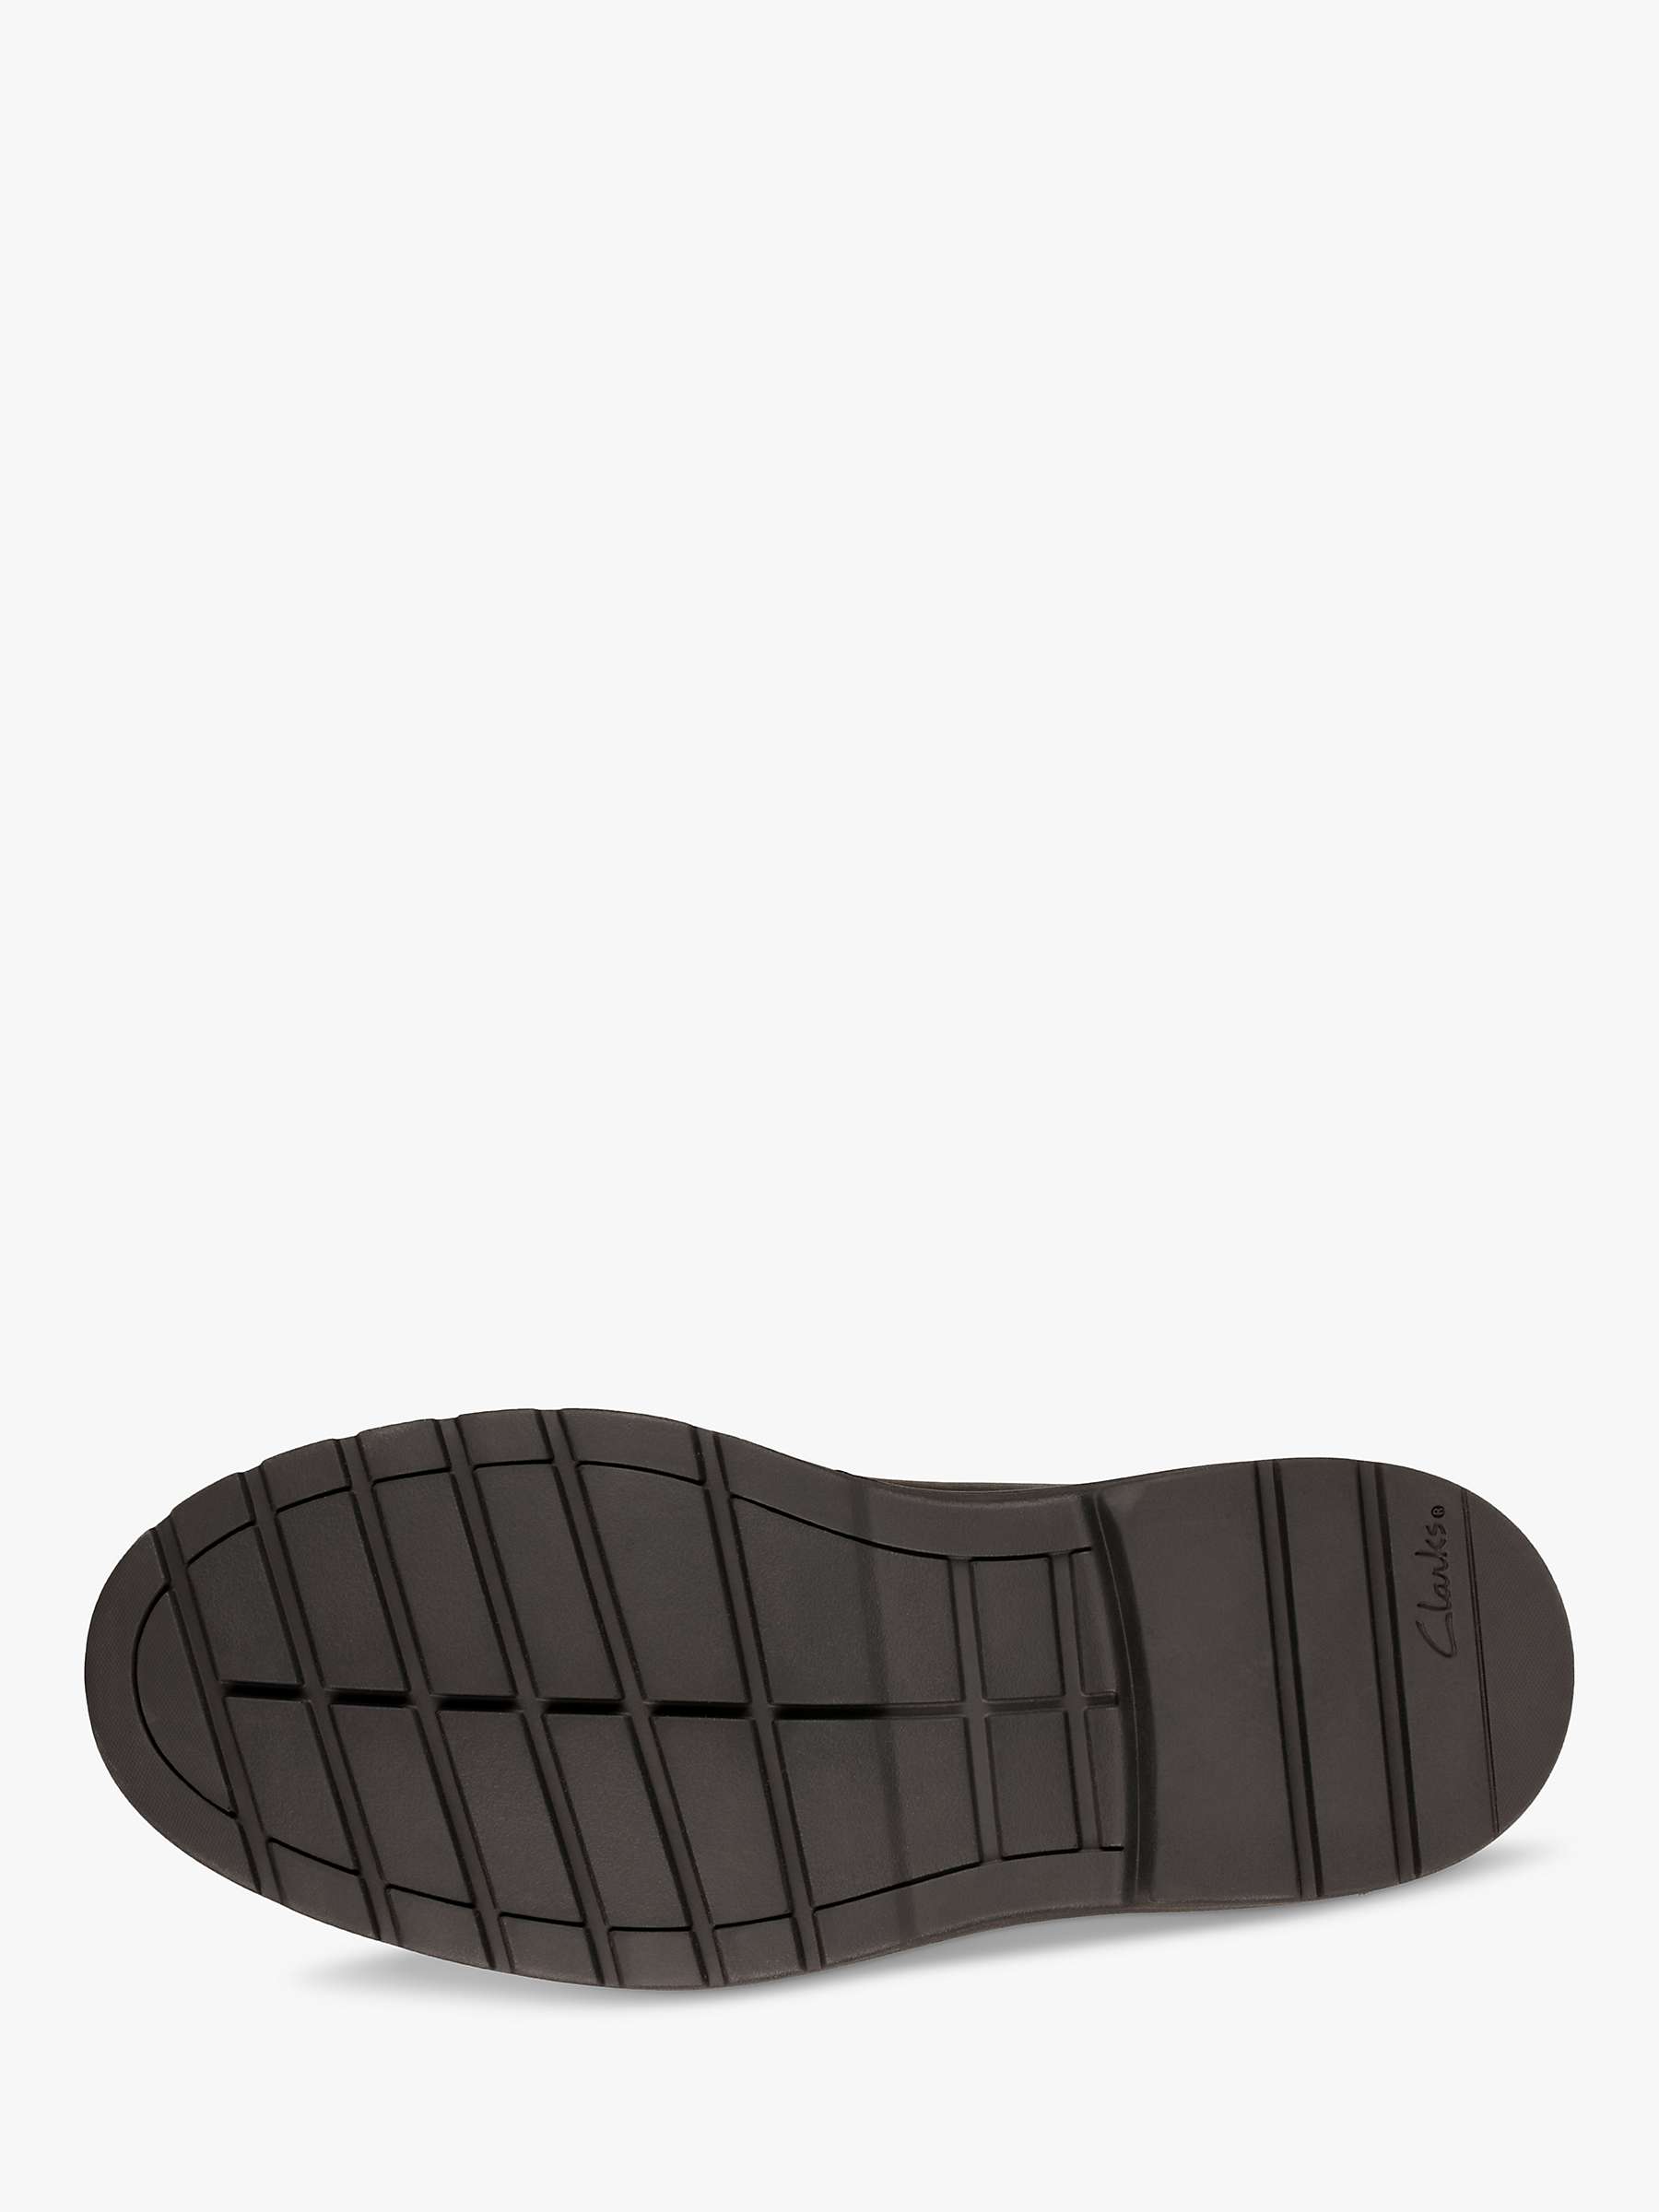 Buy Clarks Kids' Loxham Pace Leather School Shoes Online at johnlewis.com